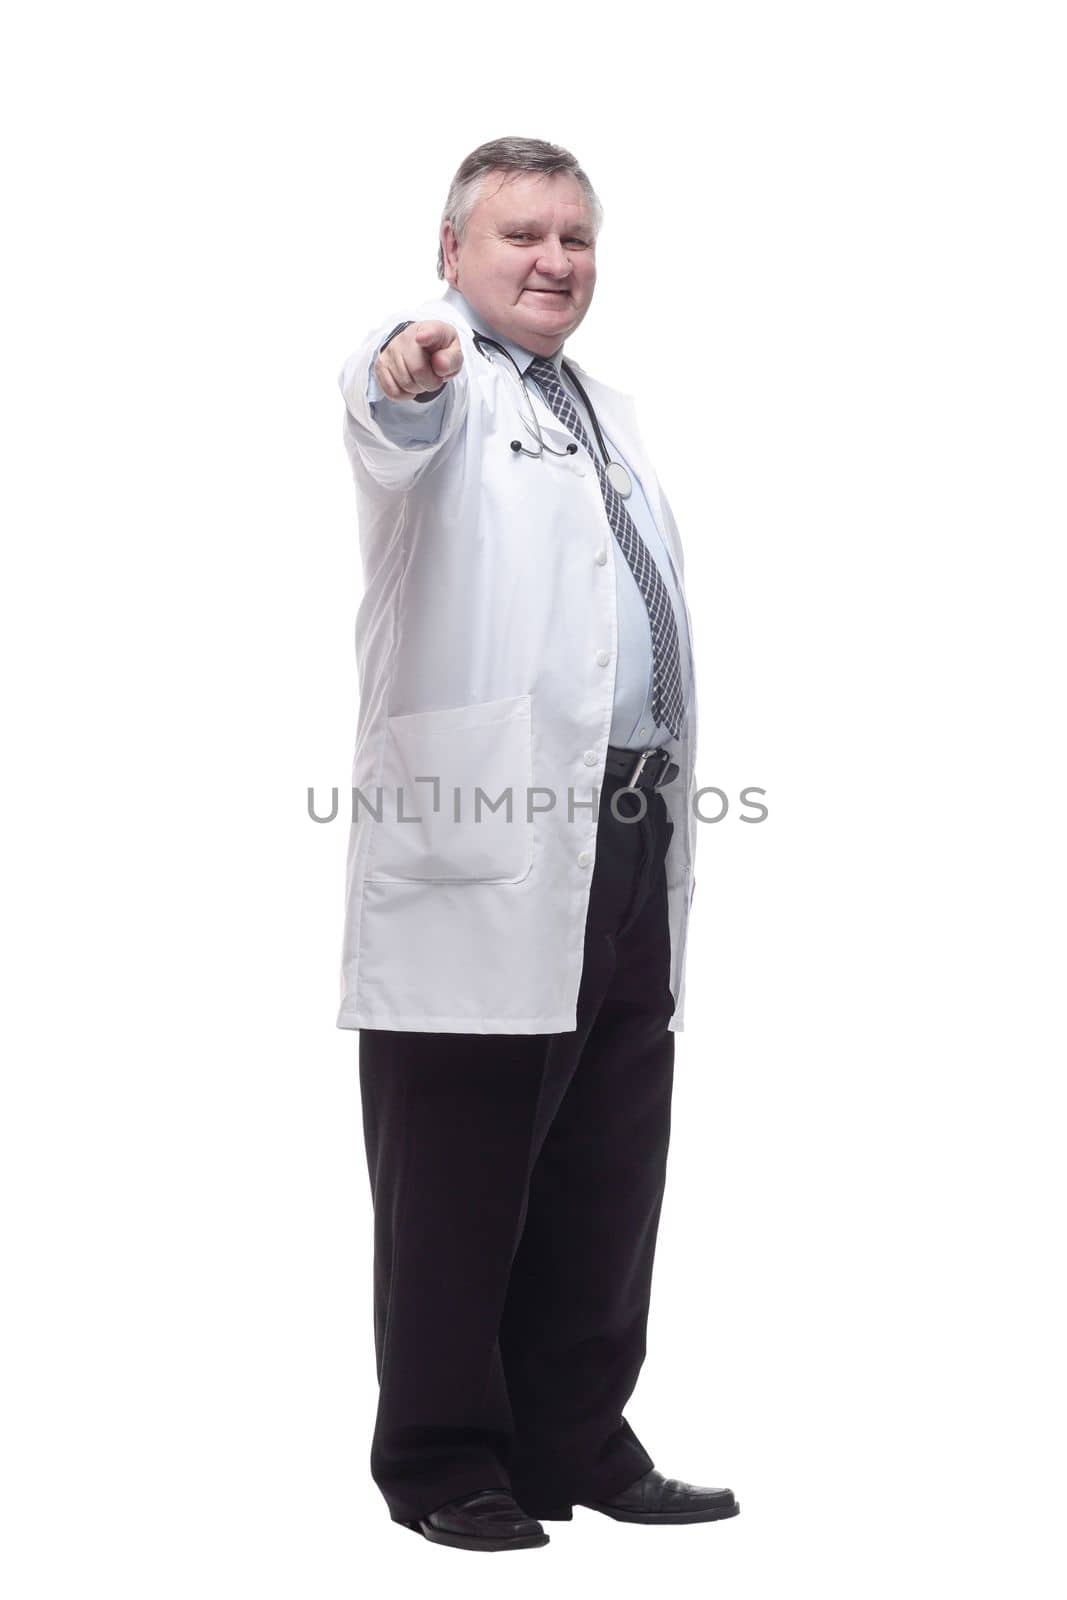 competent doctor in a white coat. isolated on a white by asdf